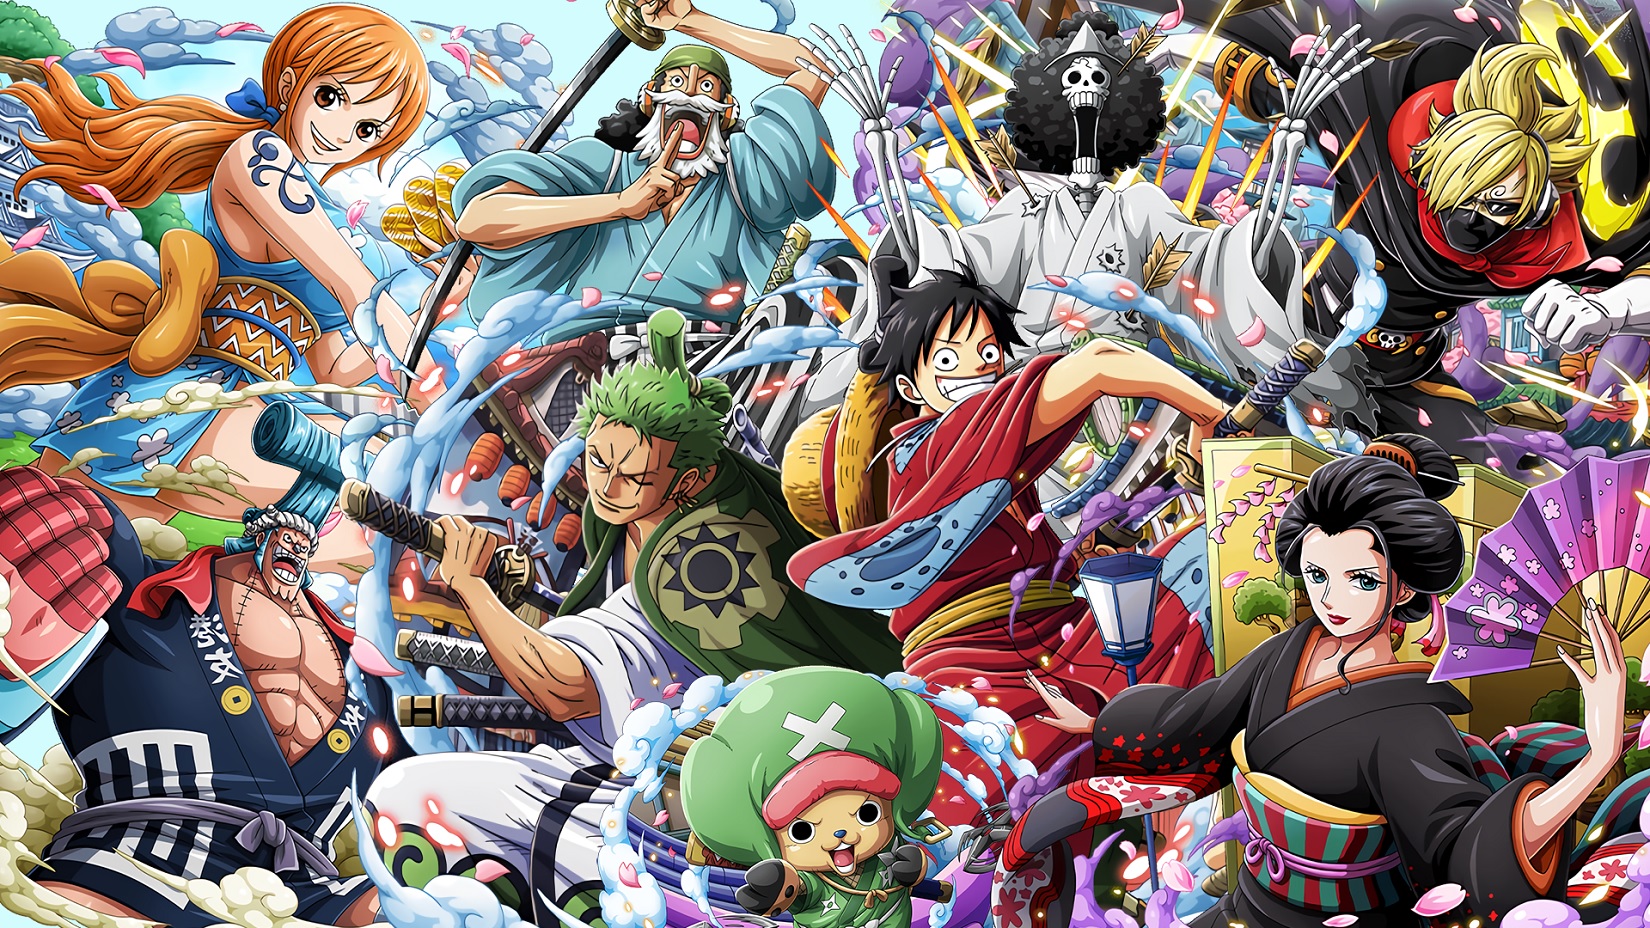 The One Piece manga’s characters’ crucial details must be deciphered by the audience